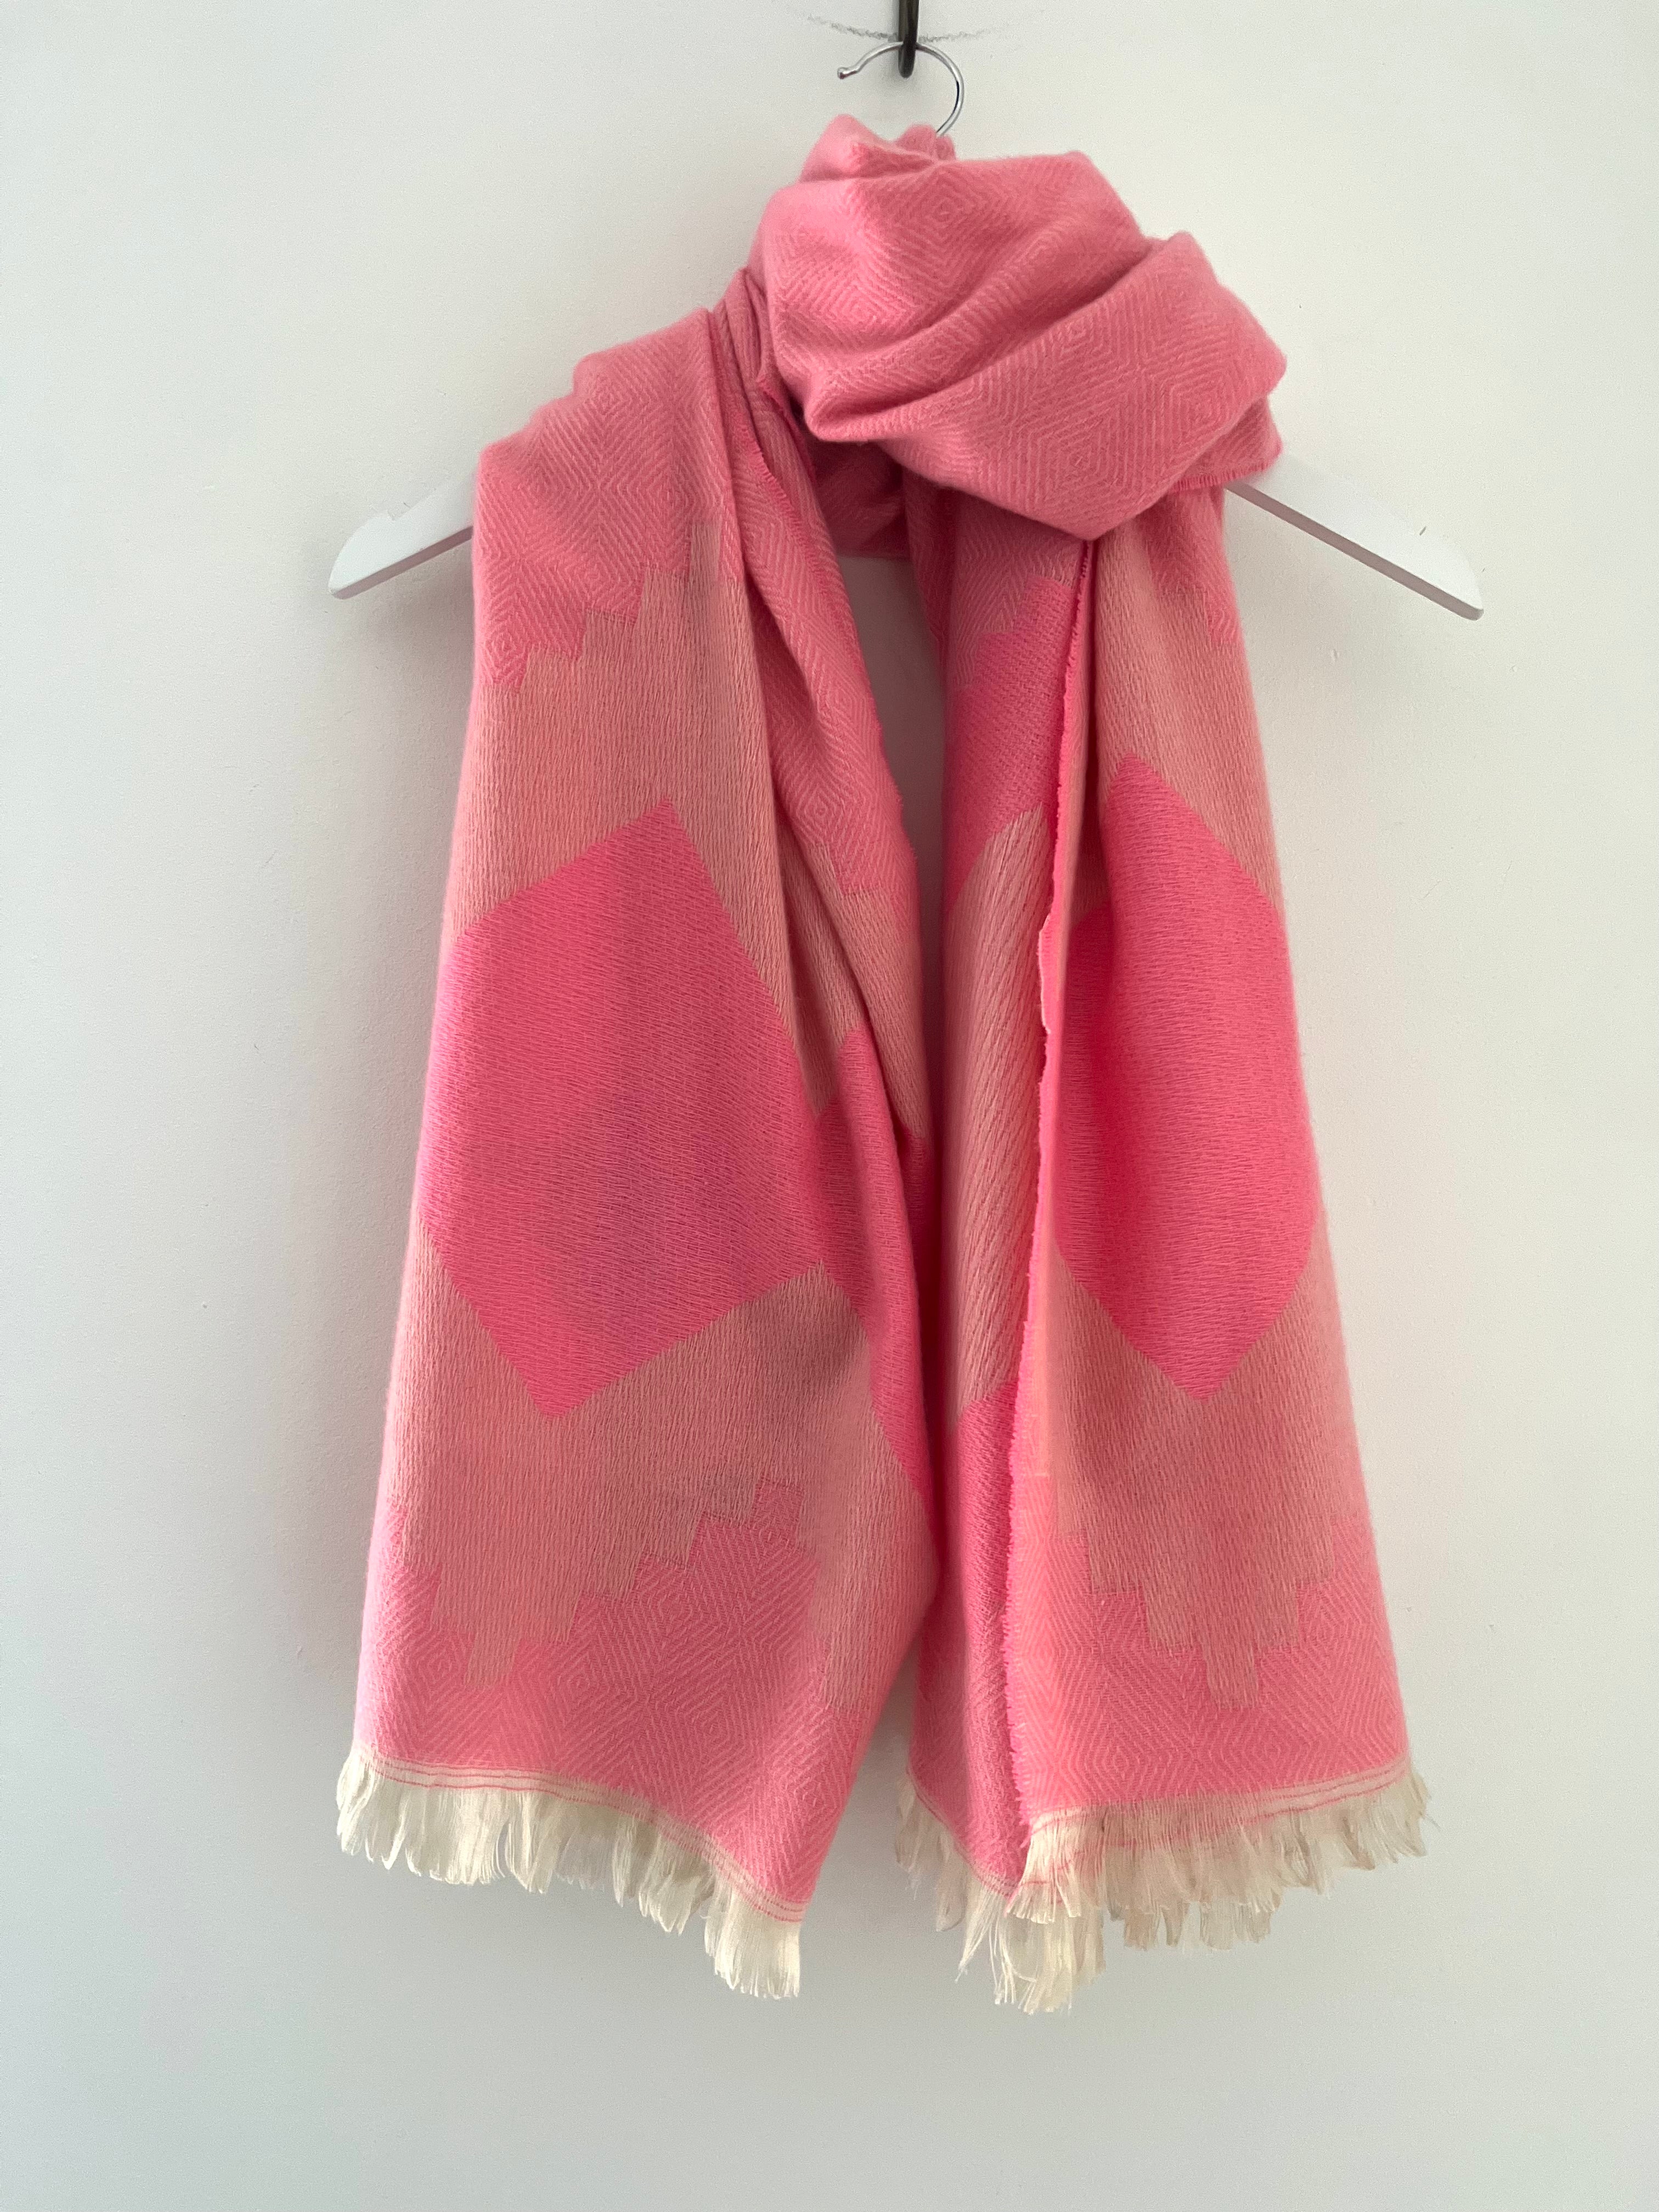 Soft Fringe Scarf in Candy Pinks